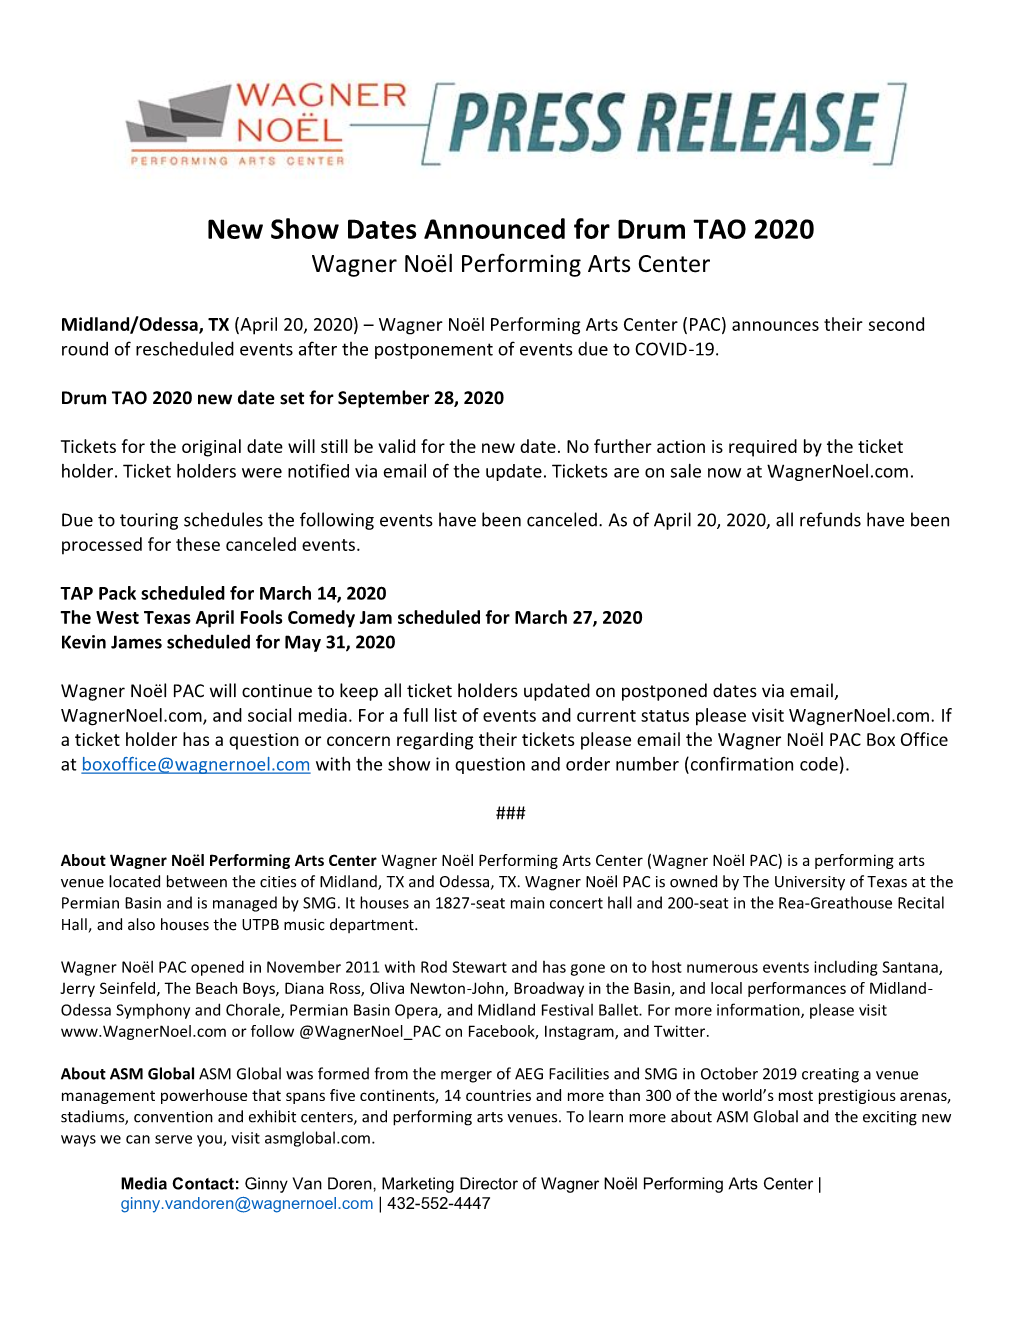 New Show Dates Announced for Drum TAO 2020 Wagner Noël Performing Arts Center